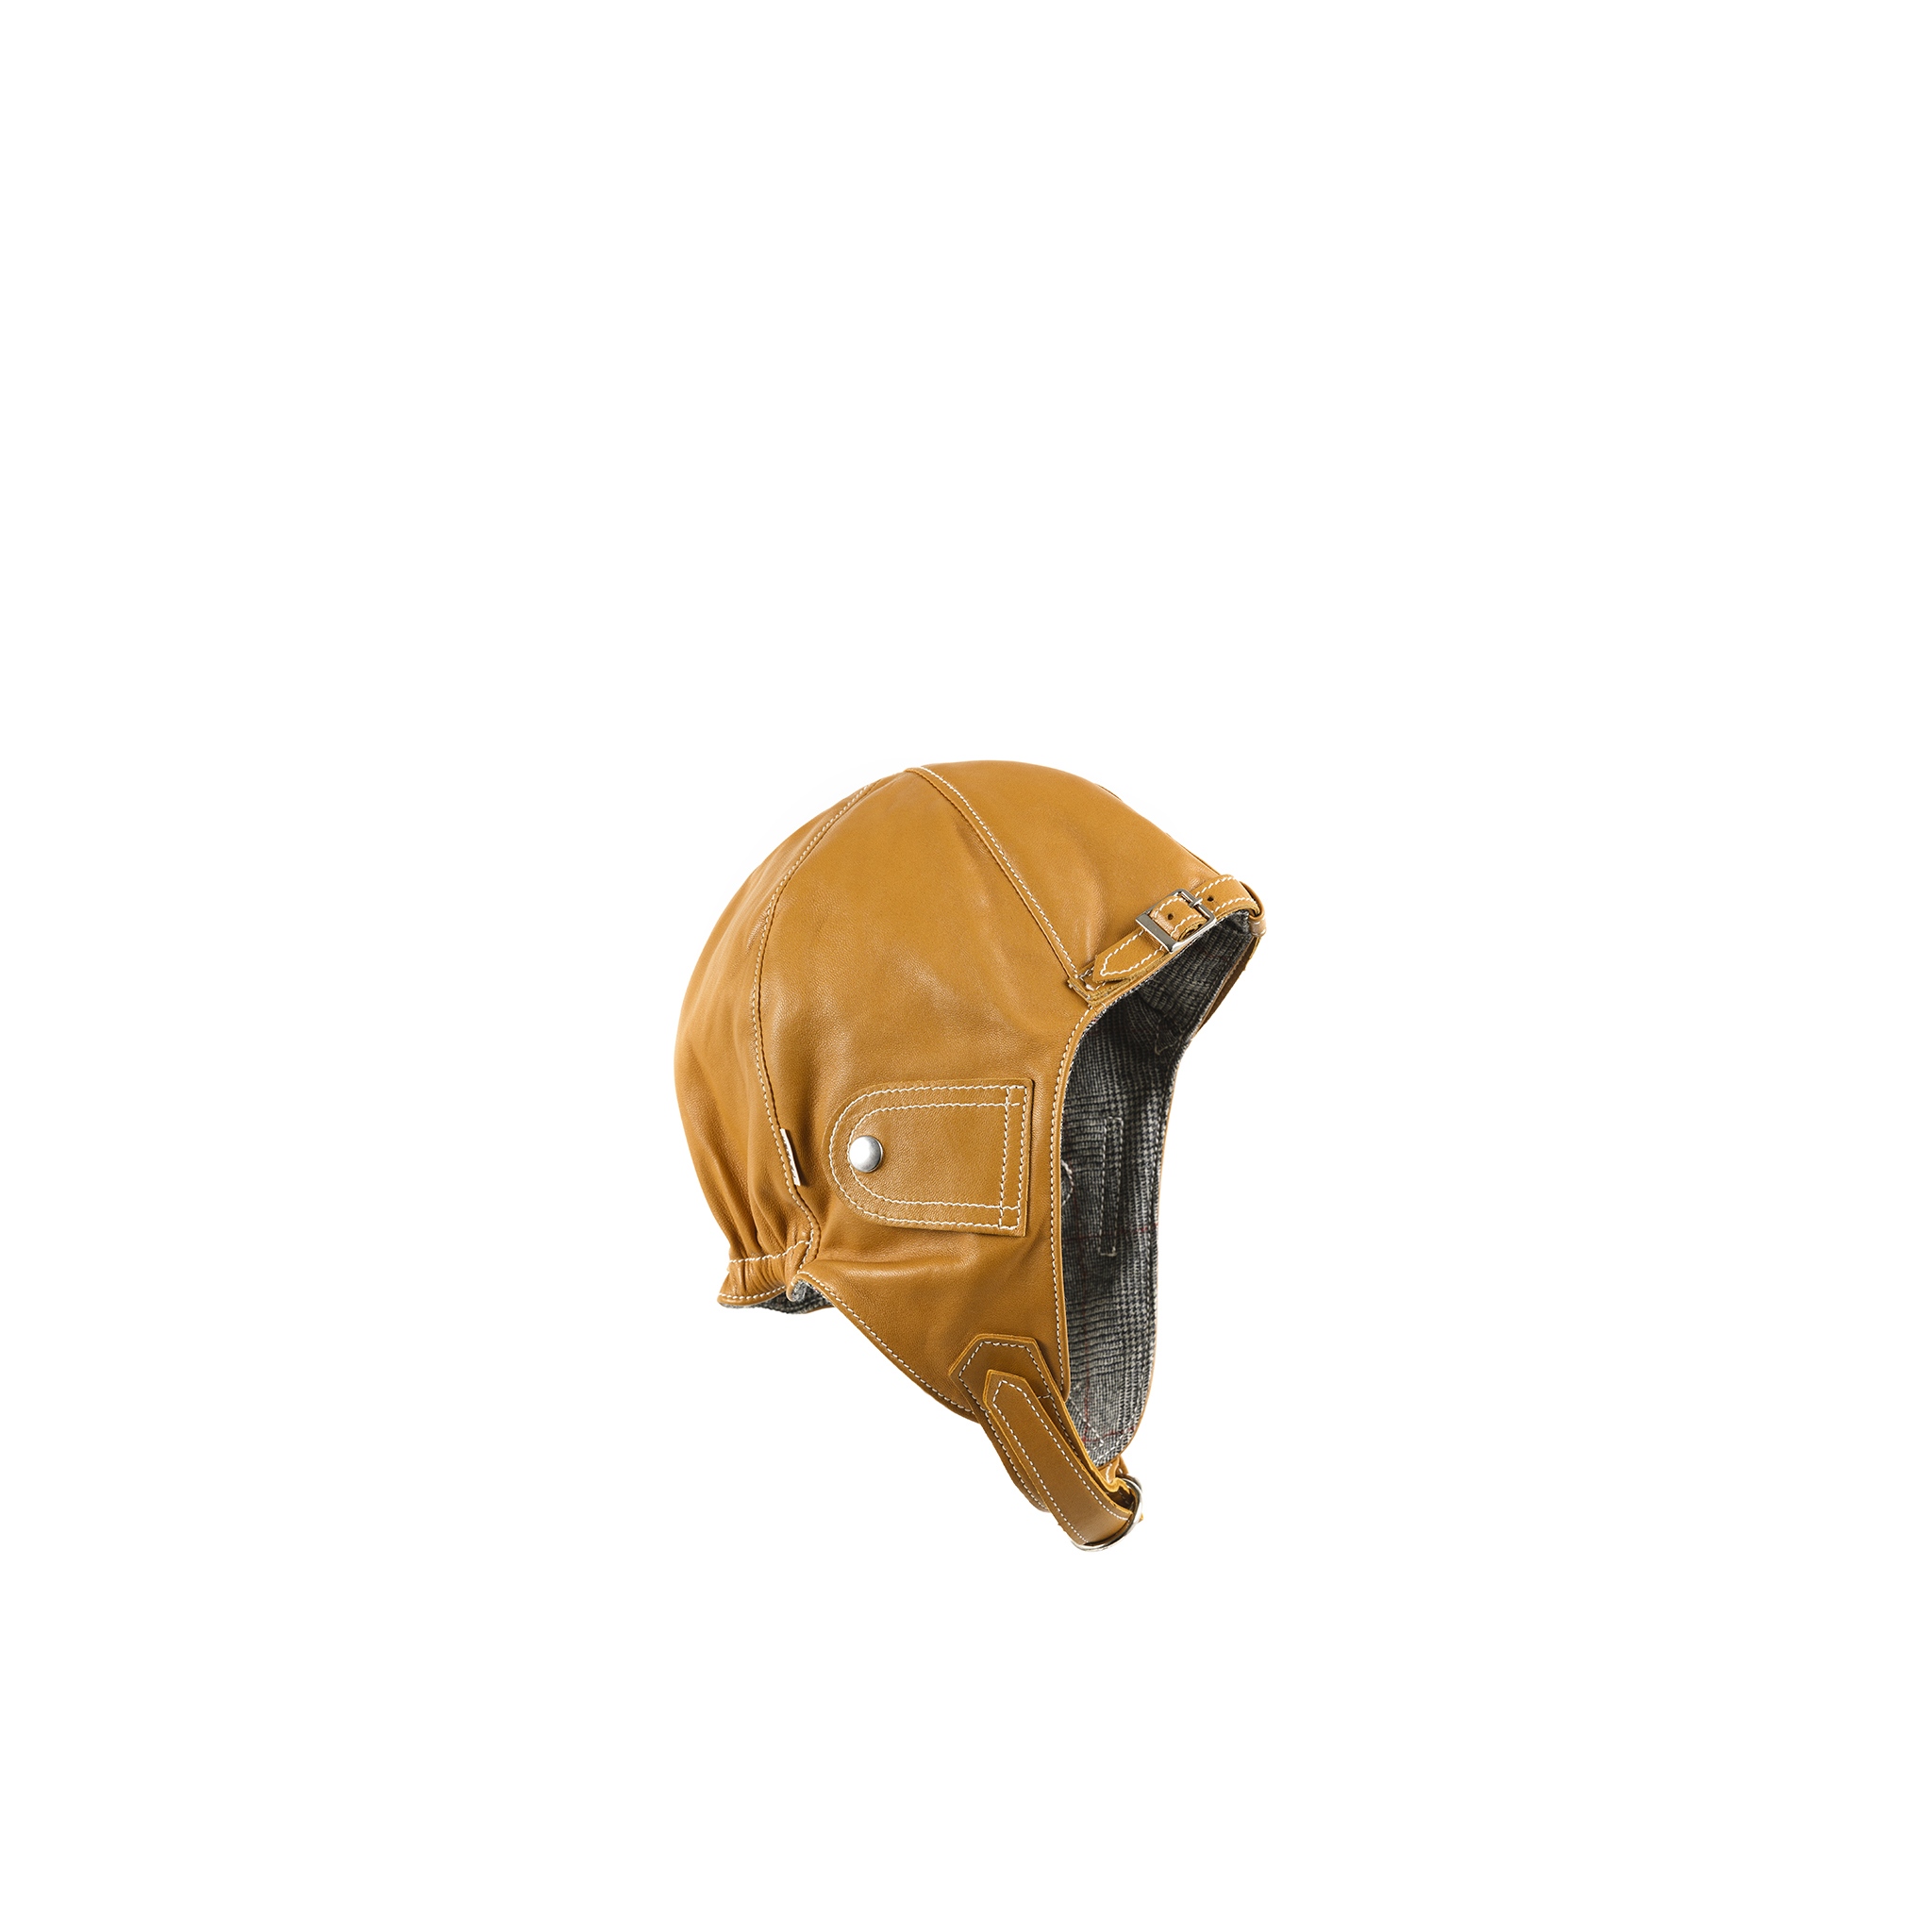 Driver Helmet - Fox Brothers flannel lining - Glossy leather - Tan color